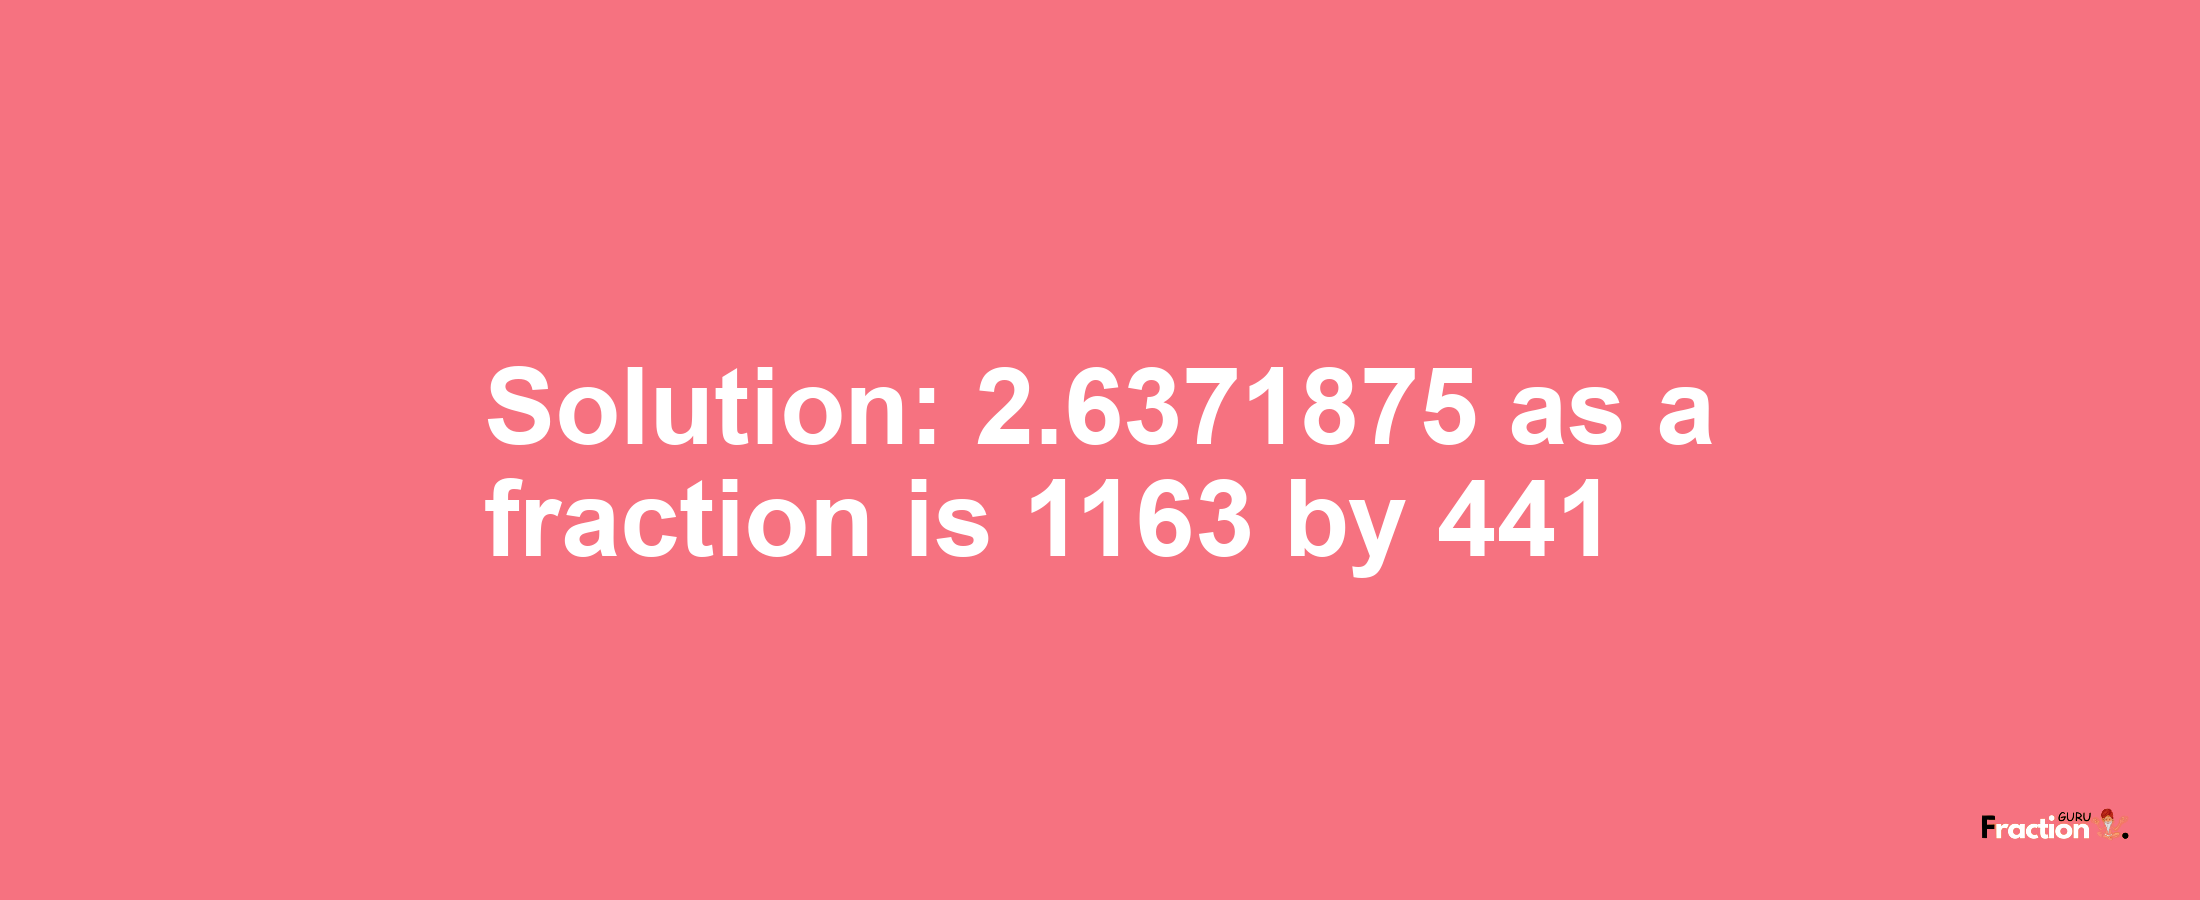 Solution:2.6371875 as a fraction is 1163/441